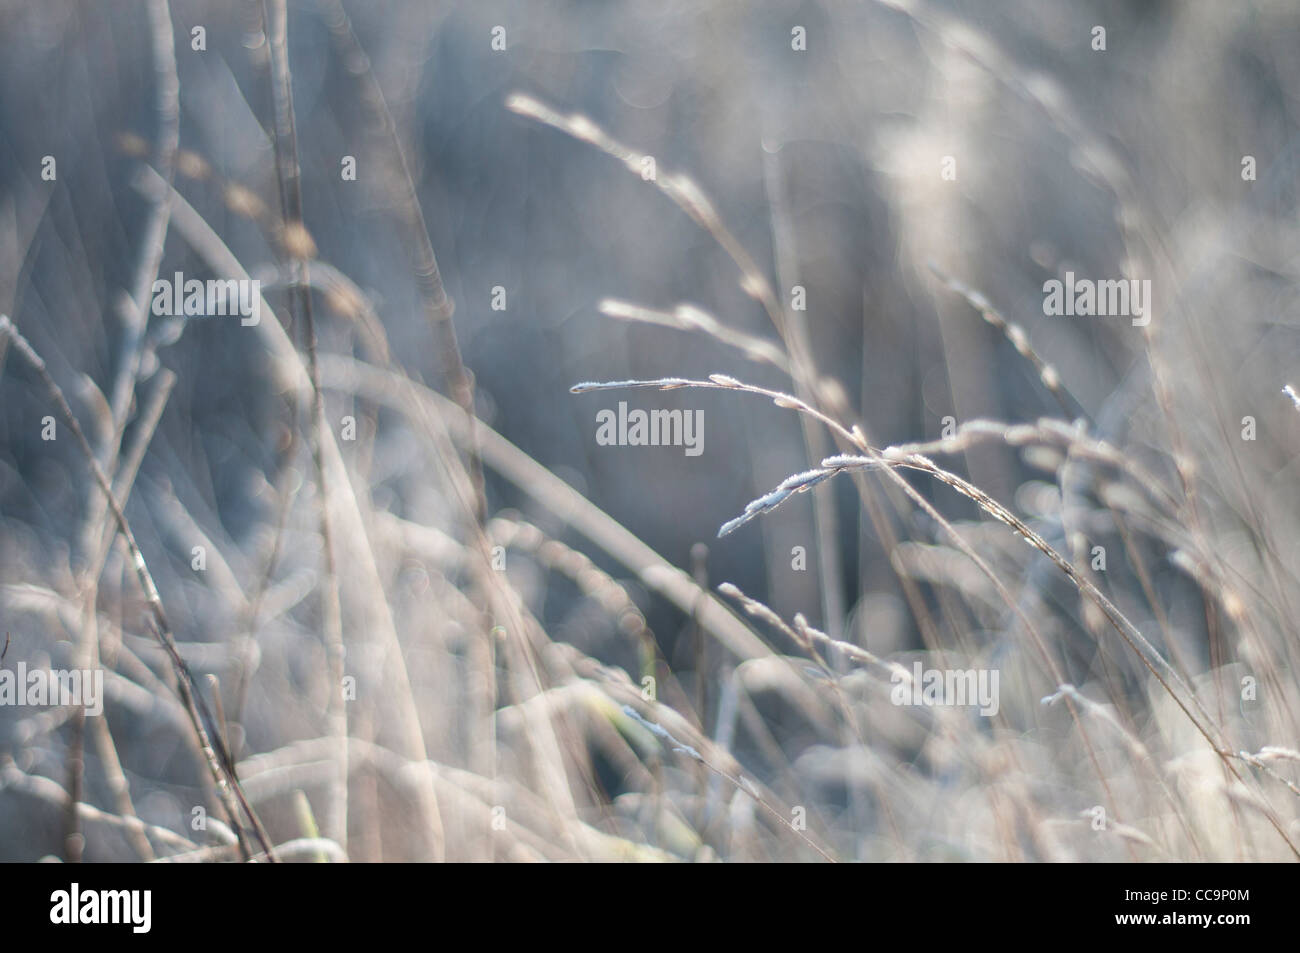 The sun on grasses on a freezing cold, frosty morning. Muted colours. A blurred background with grasses in focus Stock Photo